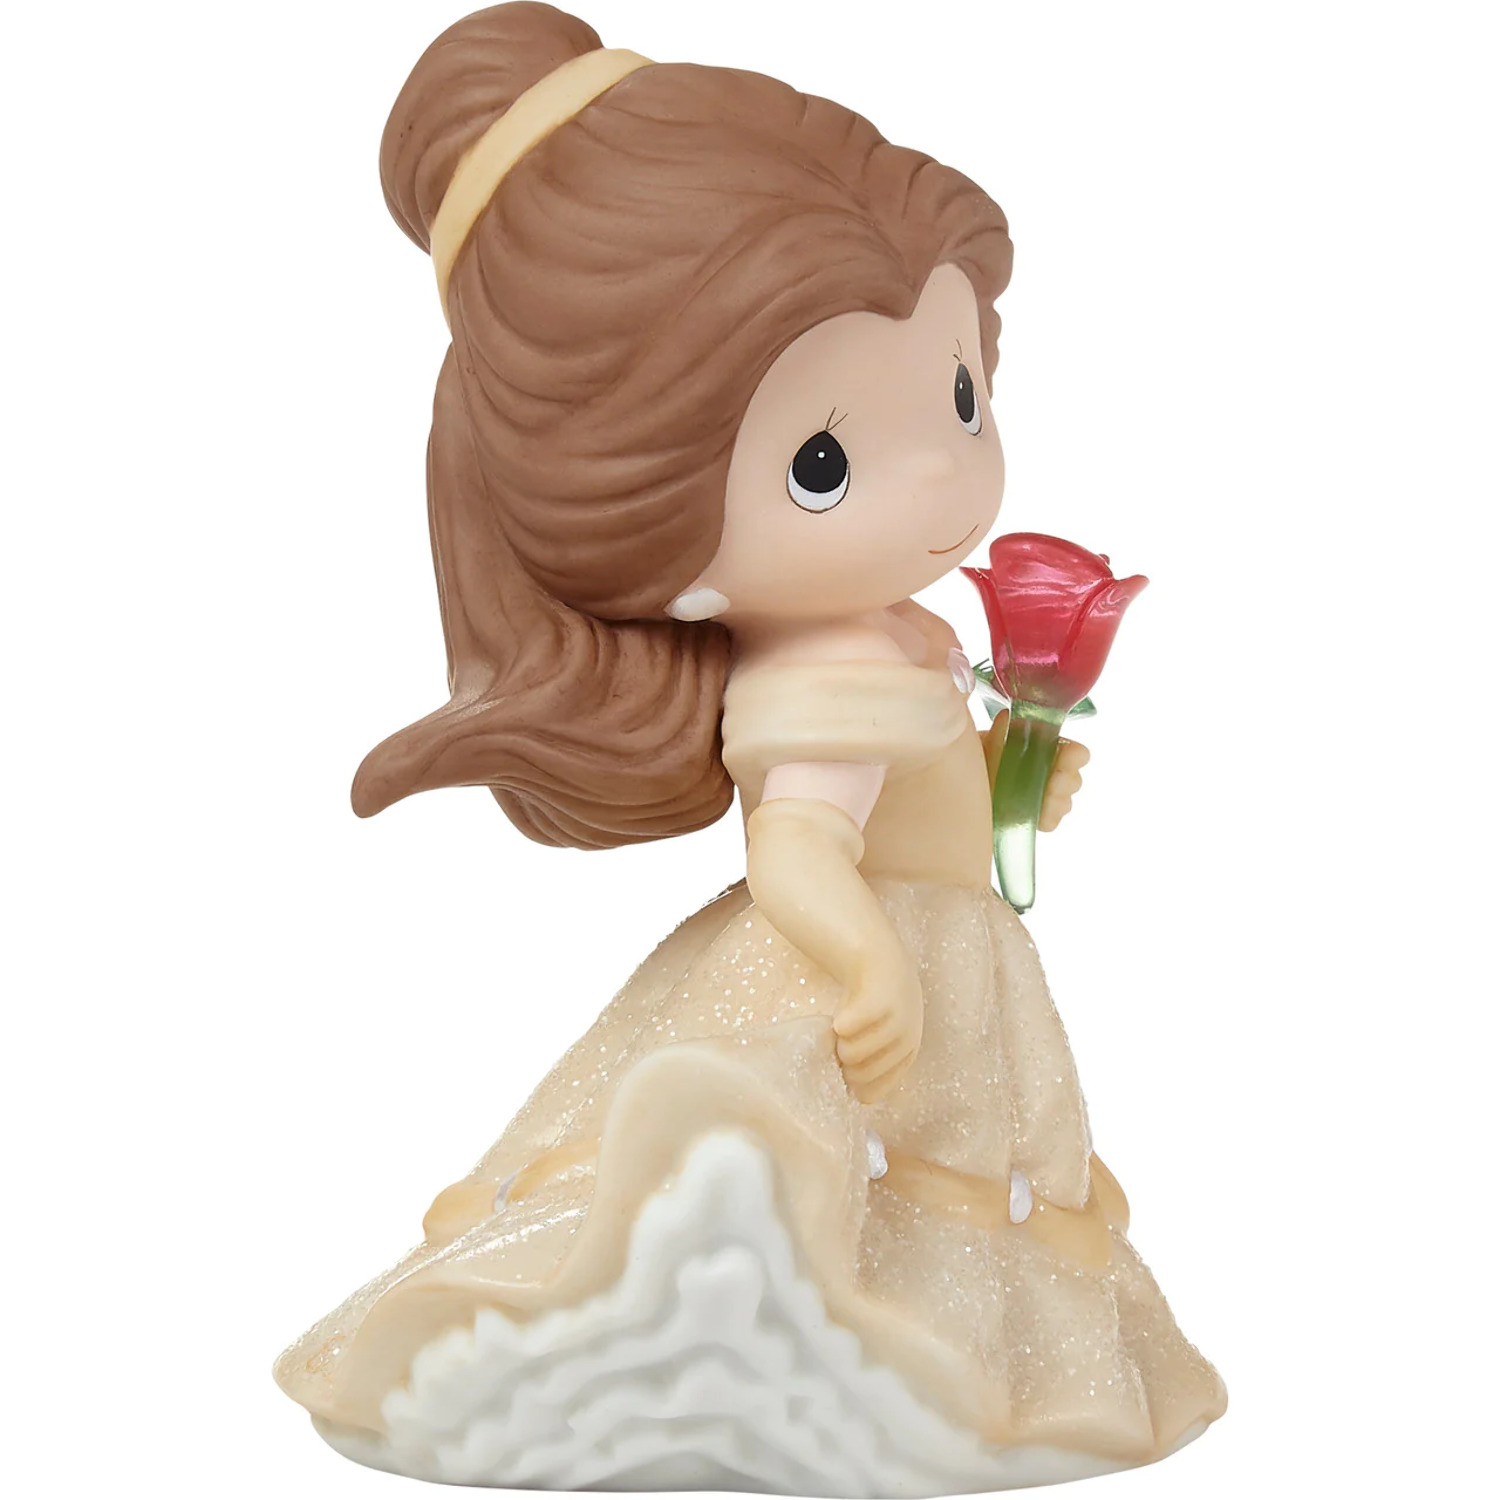 Precious Moments Disney Belle An Enchanting Moment Awaits Figurine #222028 - image 4 of 4